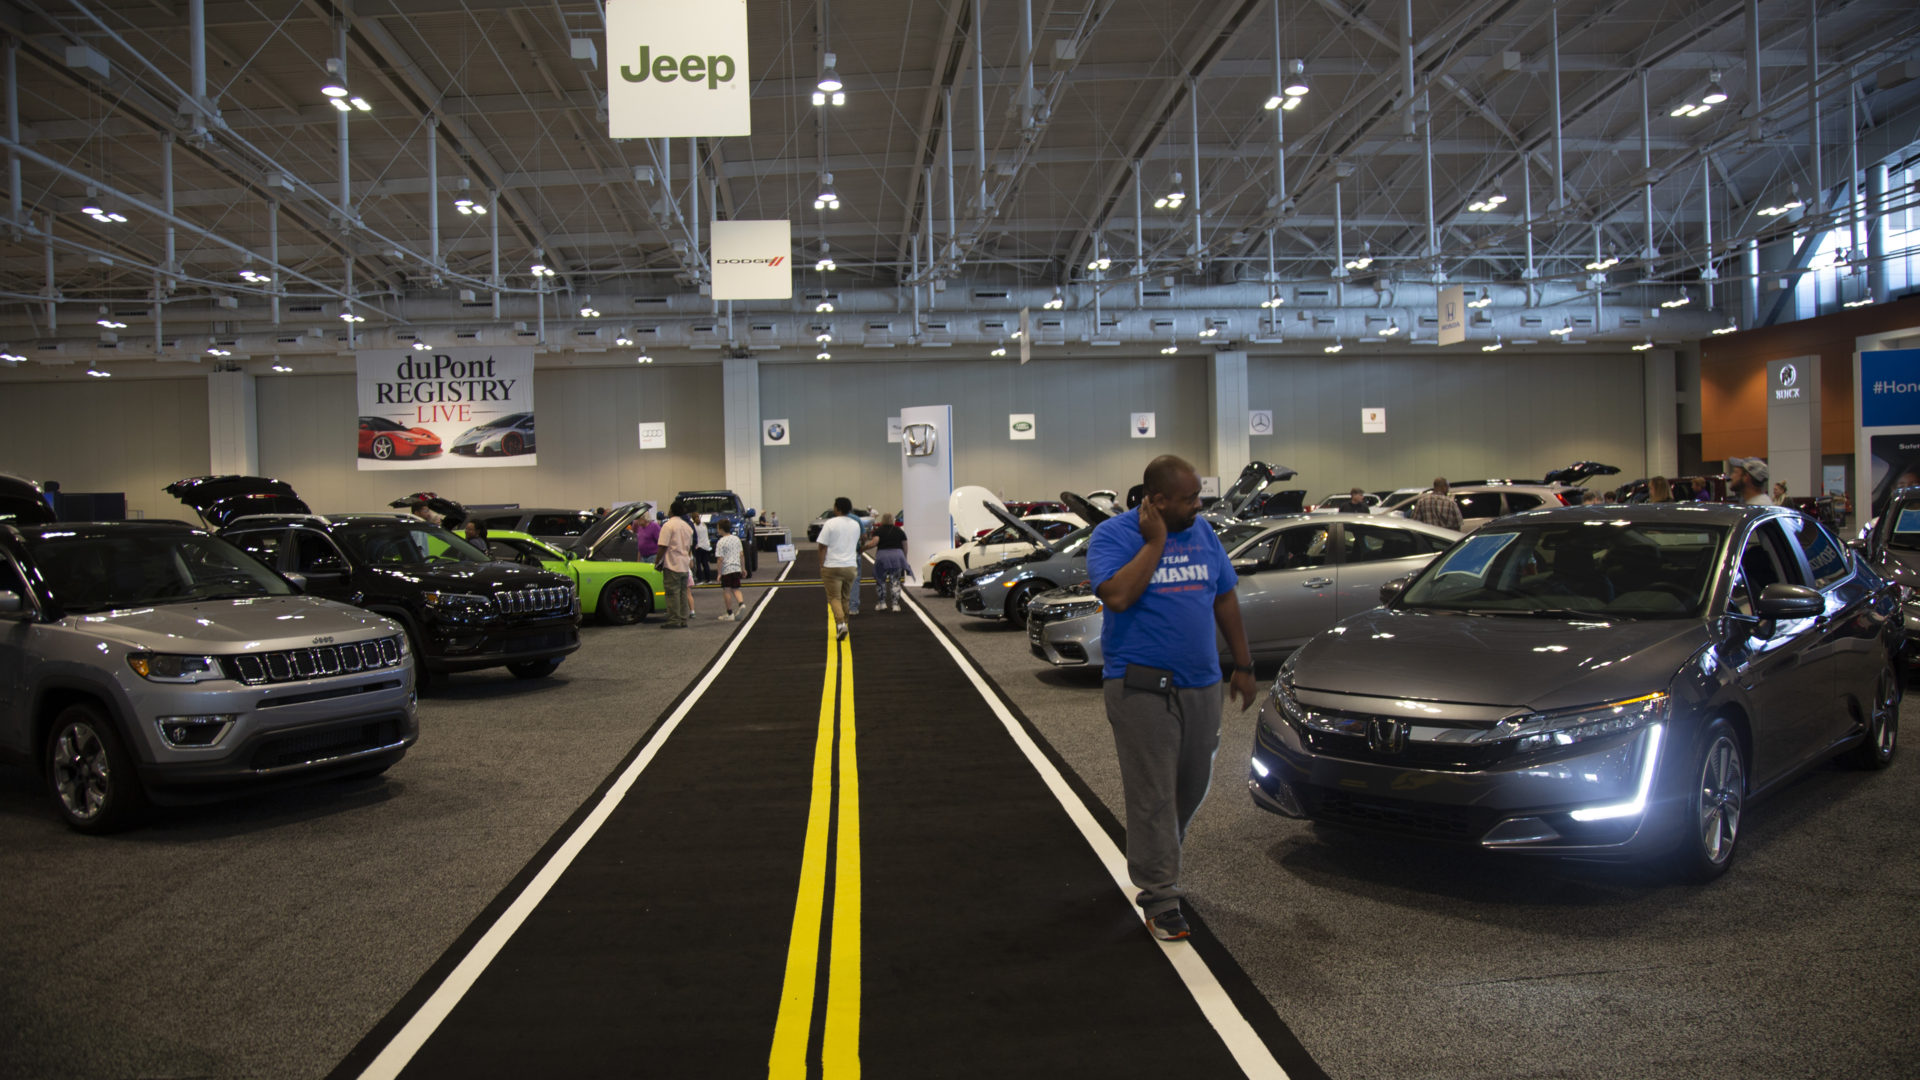 Nashville international auto show brings car enthusiasts together